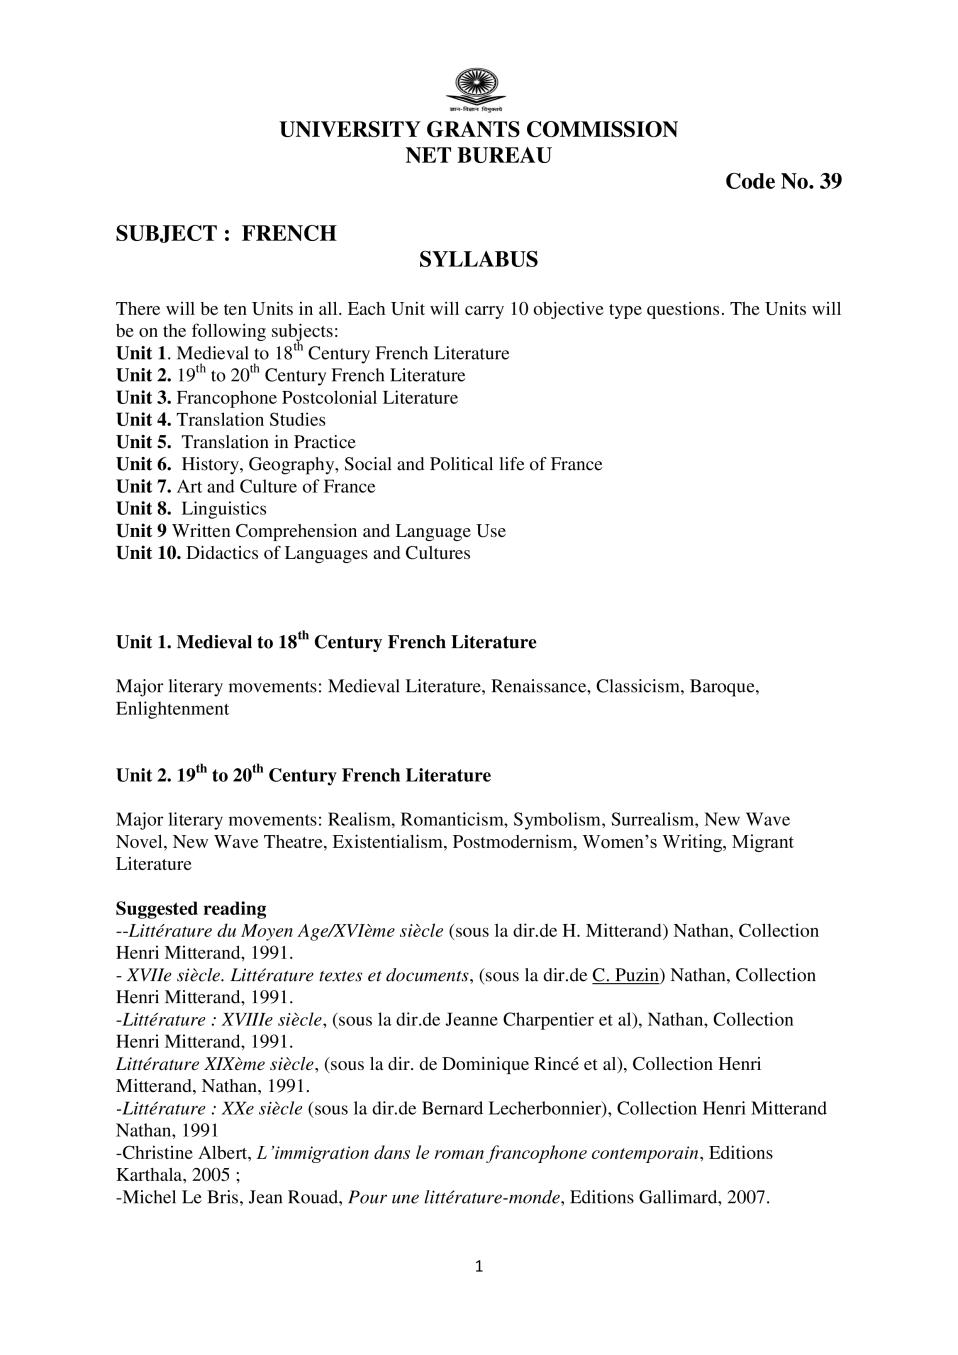 UGC NET Syllabus for French 2020 - Page 1